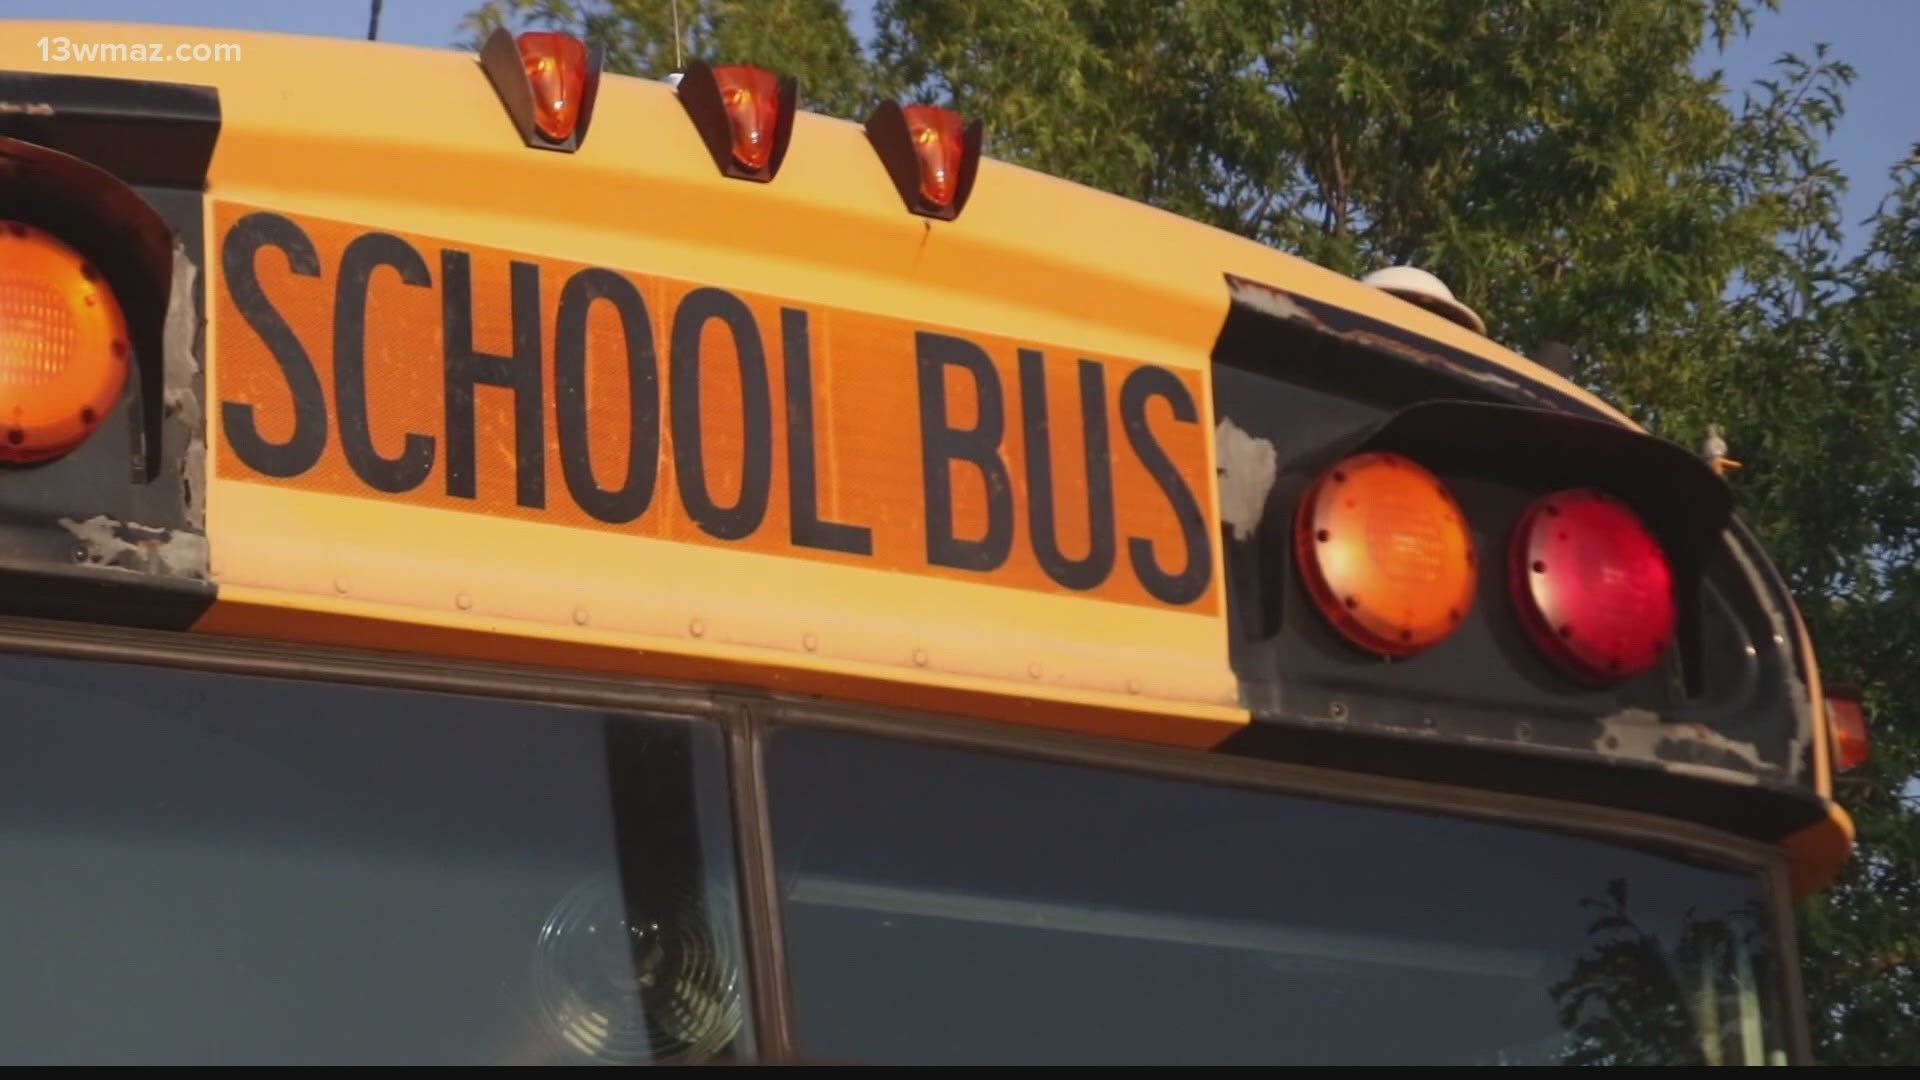 A viewer reached out wondering whether a new mask mandate for public transportation applies to school buses.